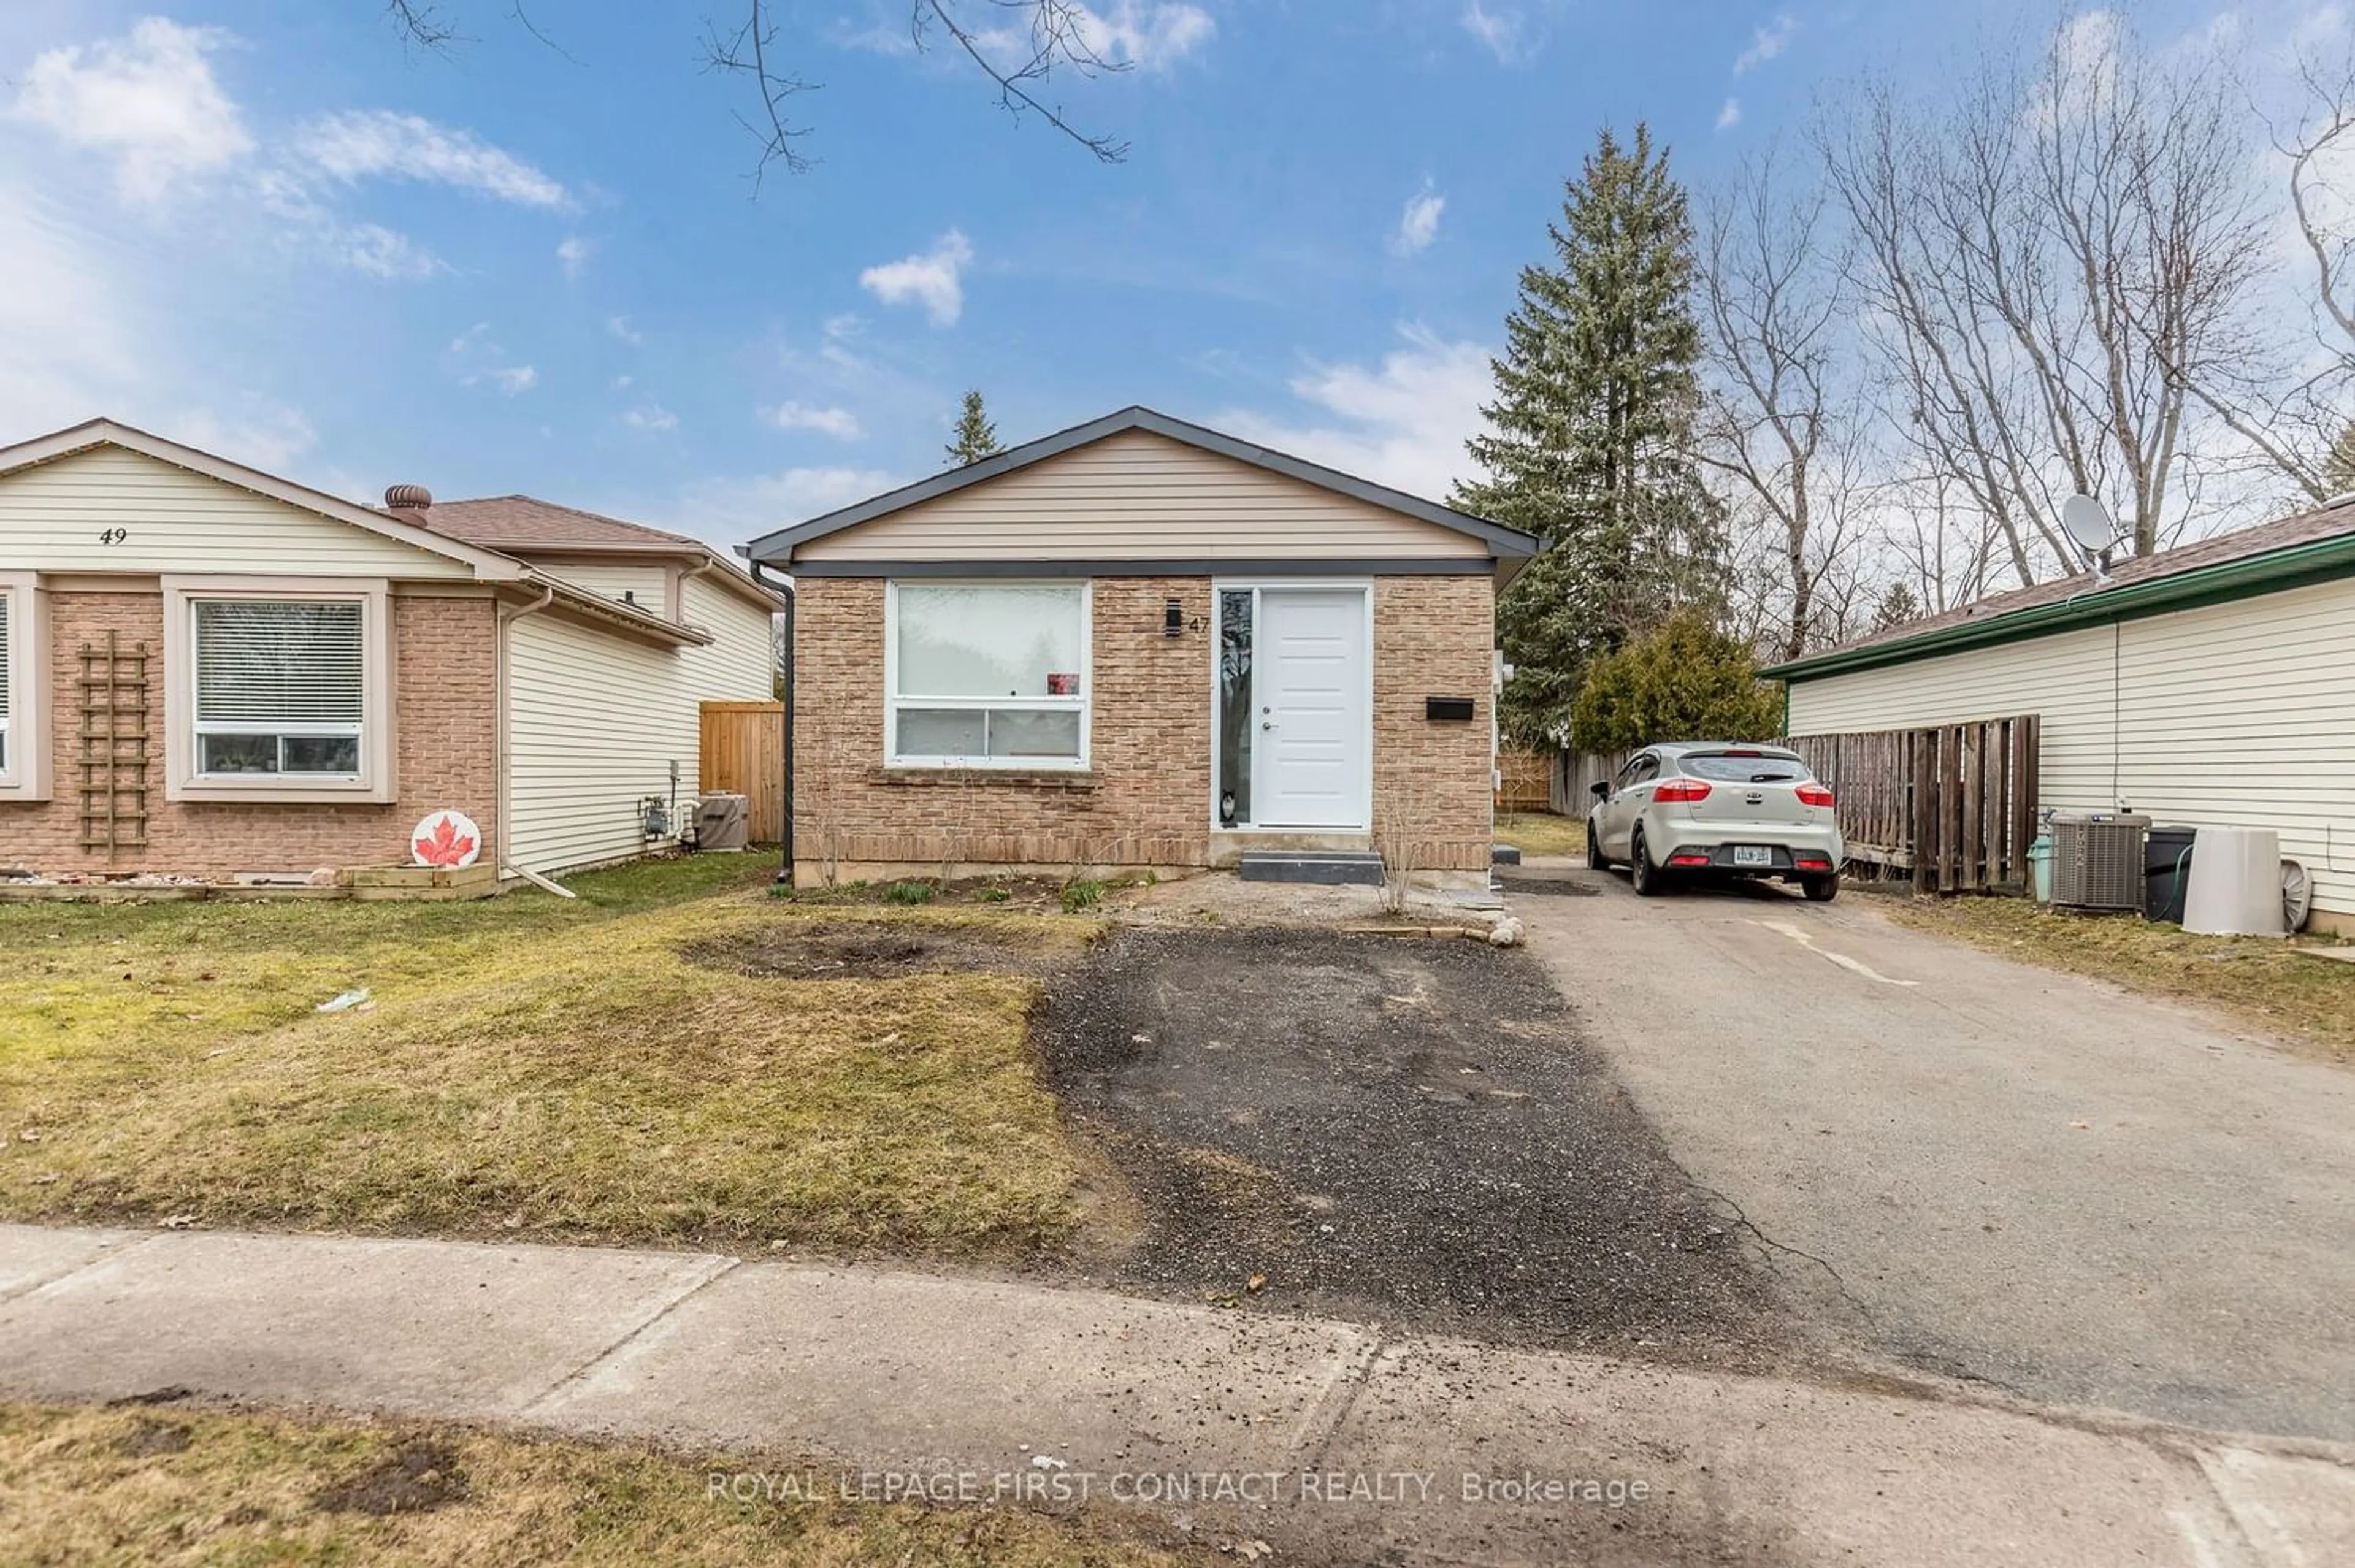 Frontside or backside of a home for 47 Mowat Cres, Barrie Ontario L4N 5B4